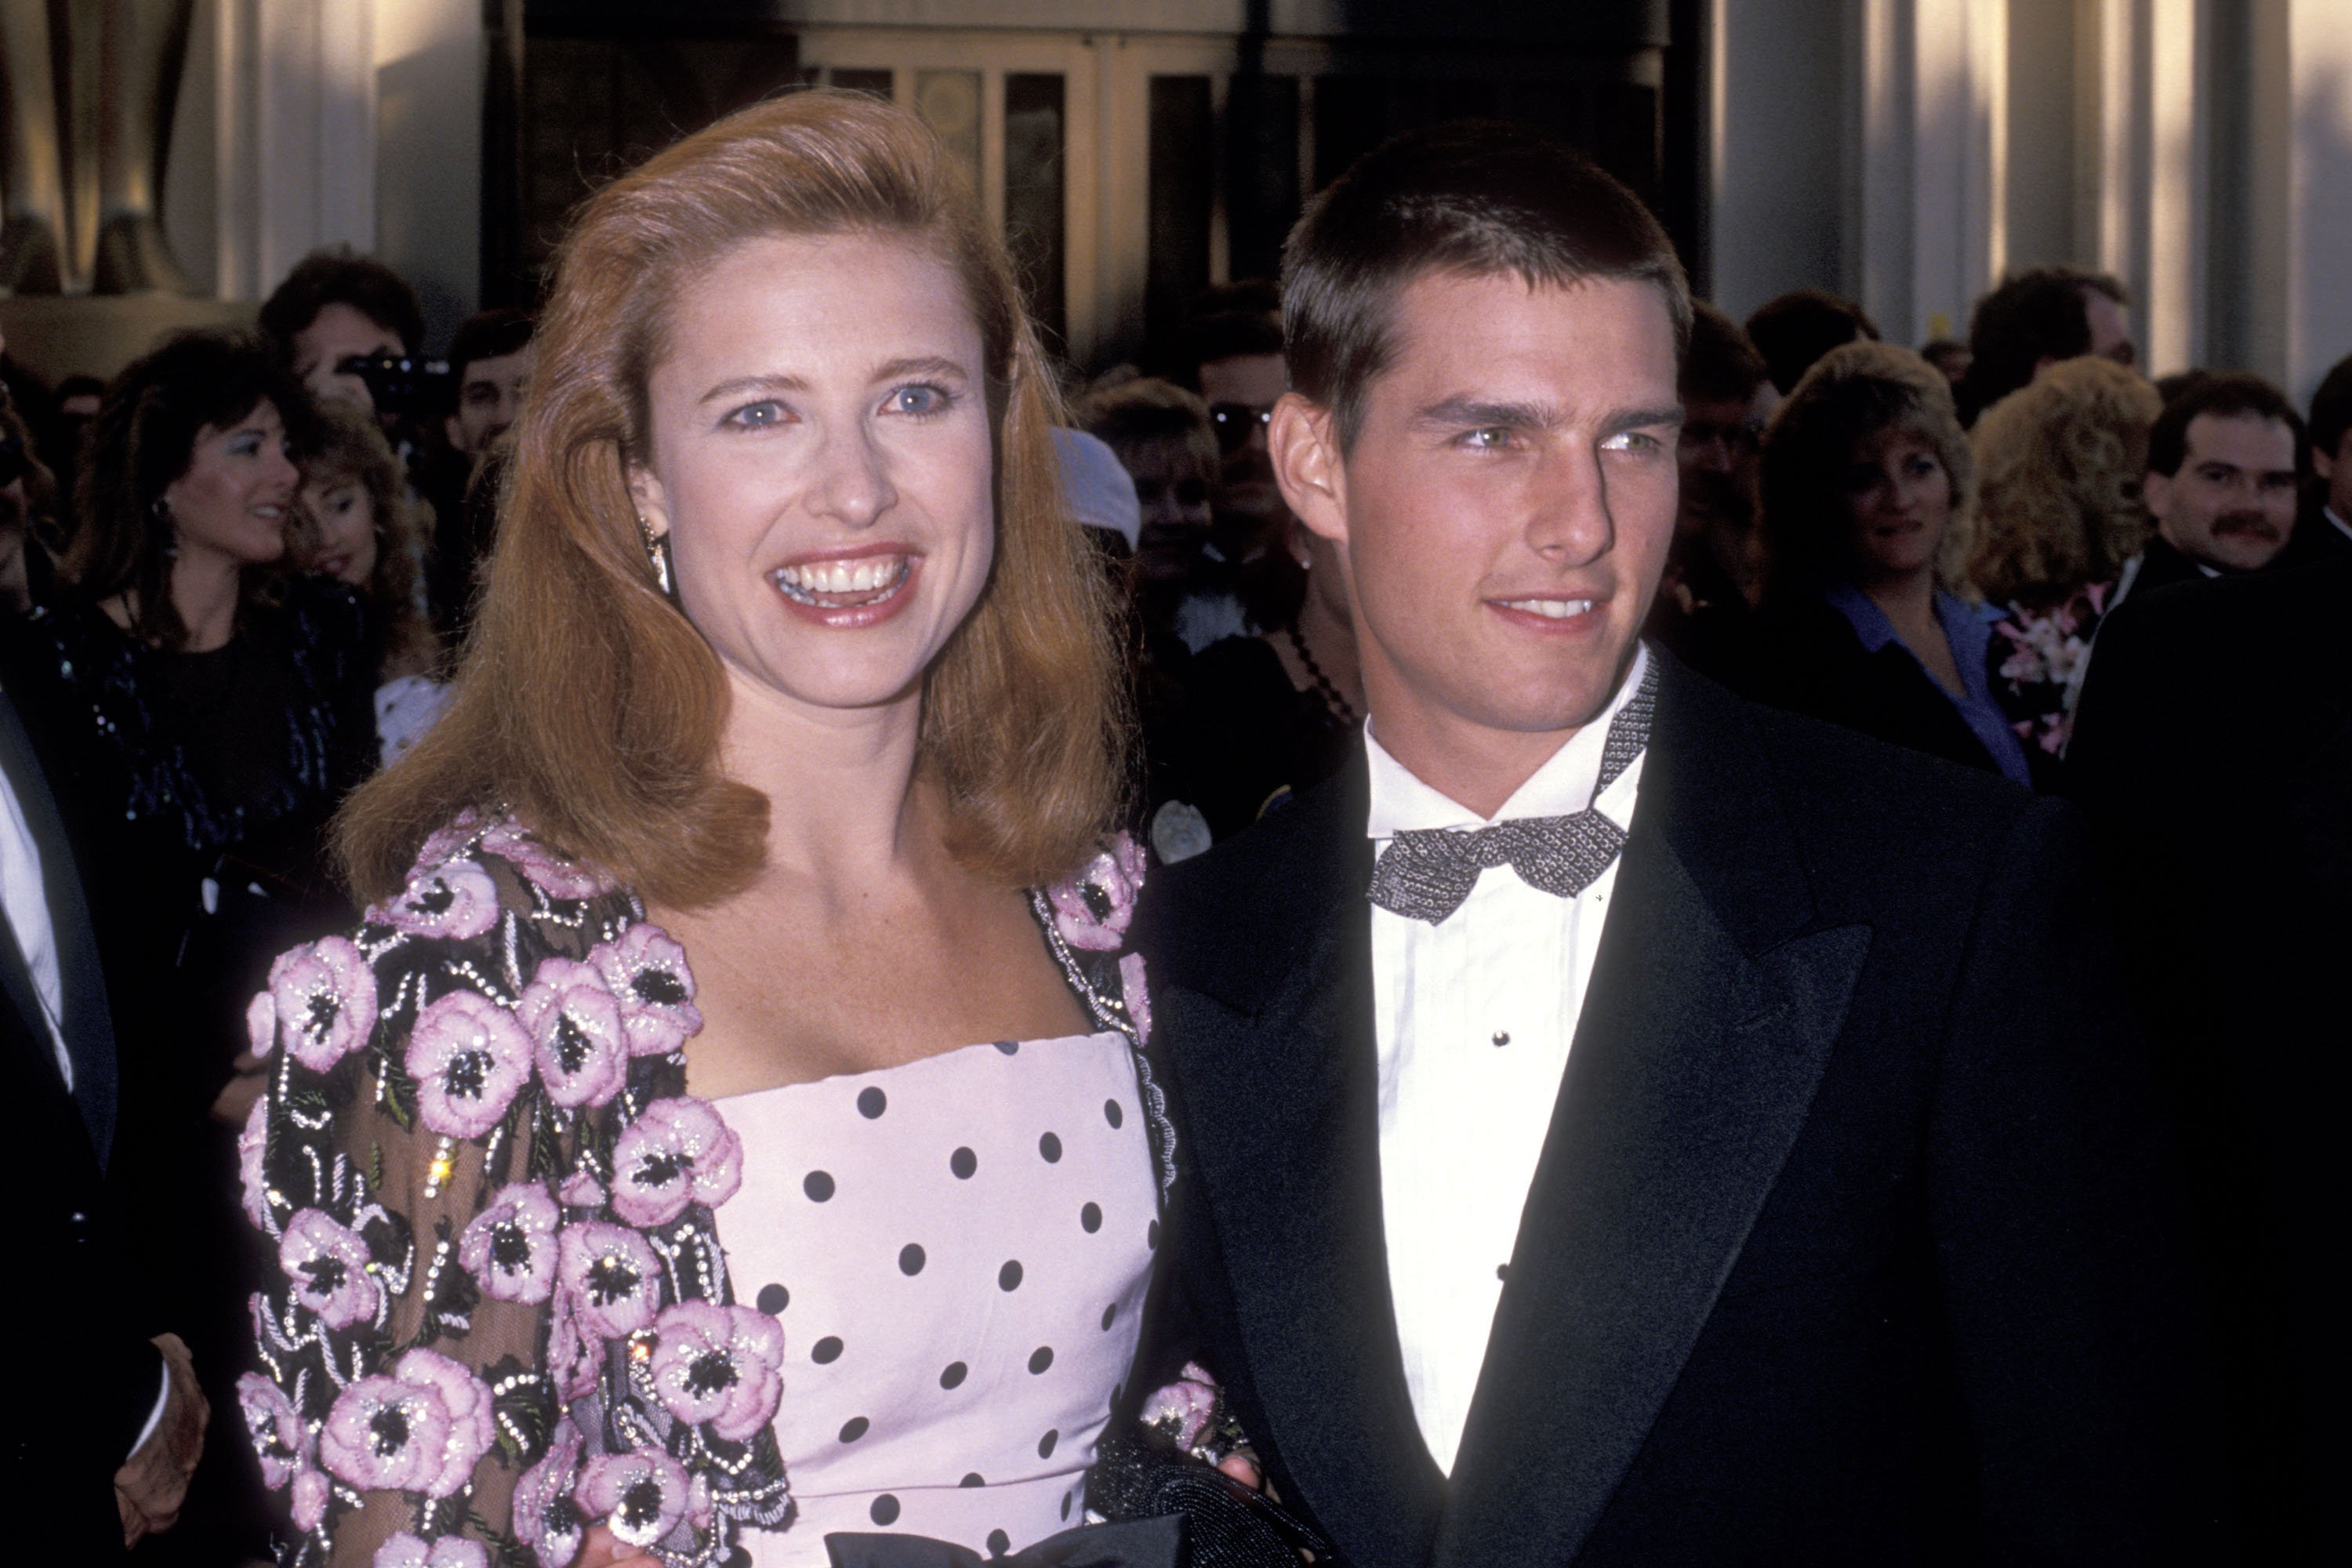 Actress Mimi Rogers and actor Tom Cruise attend the 61st Annual Academy Awards